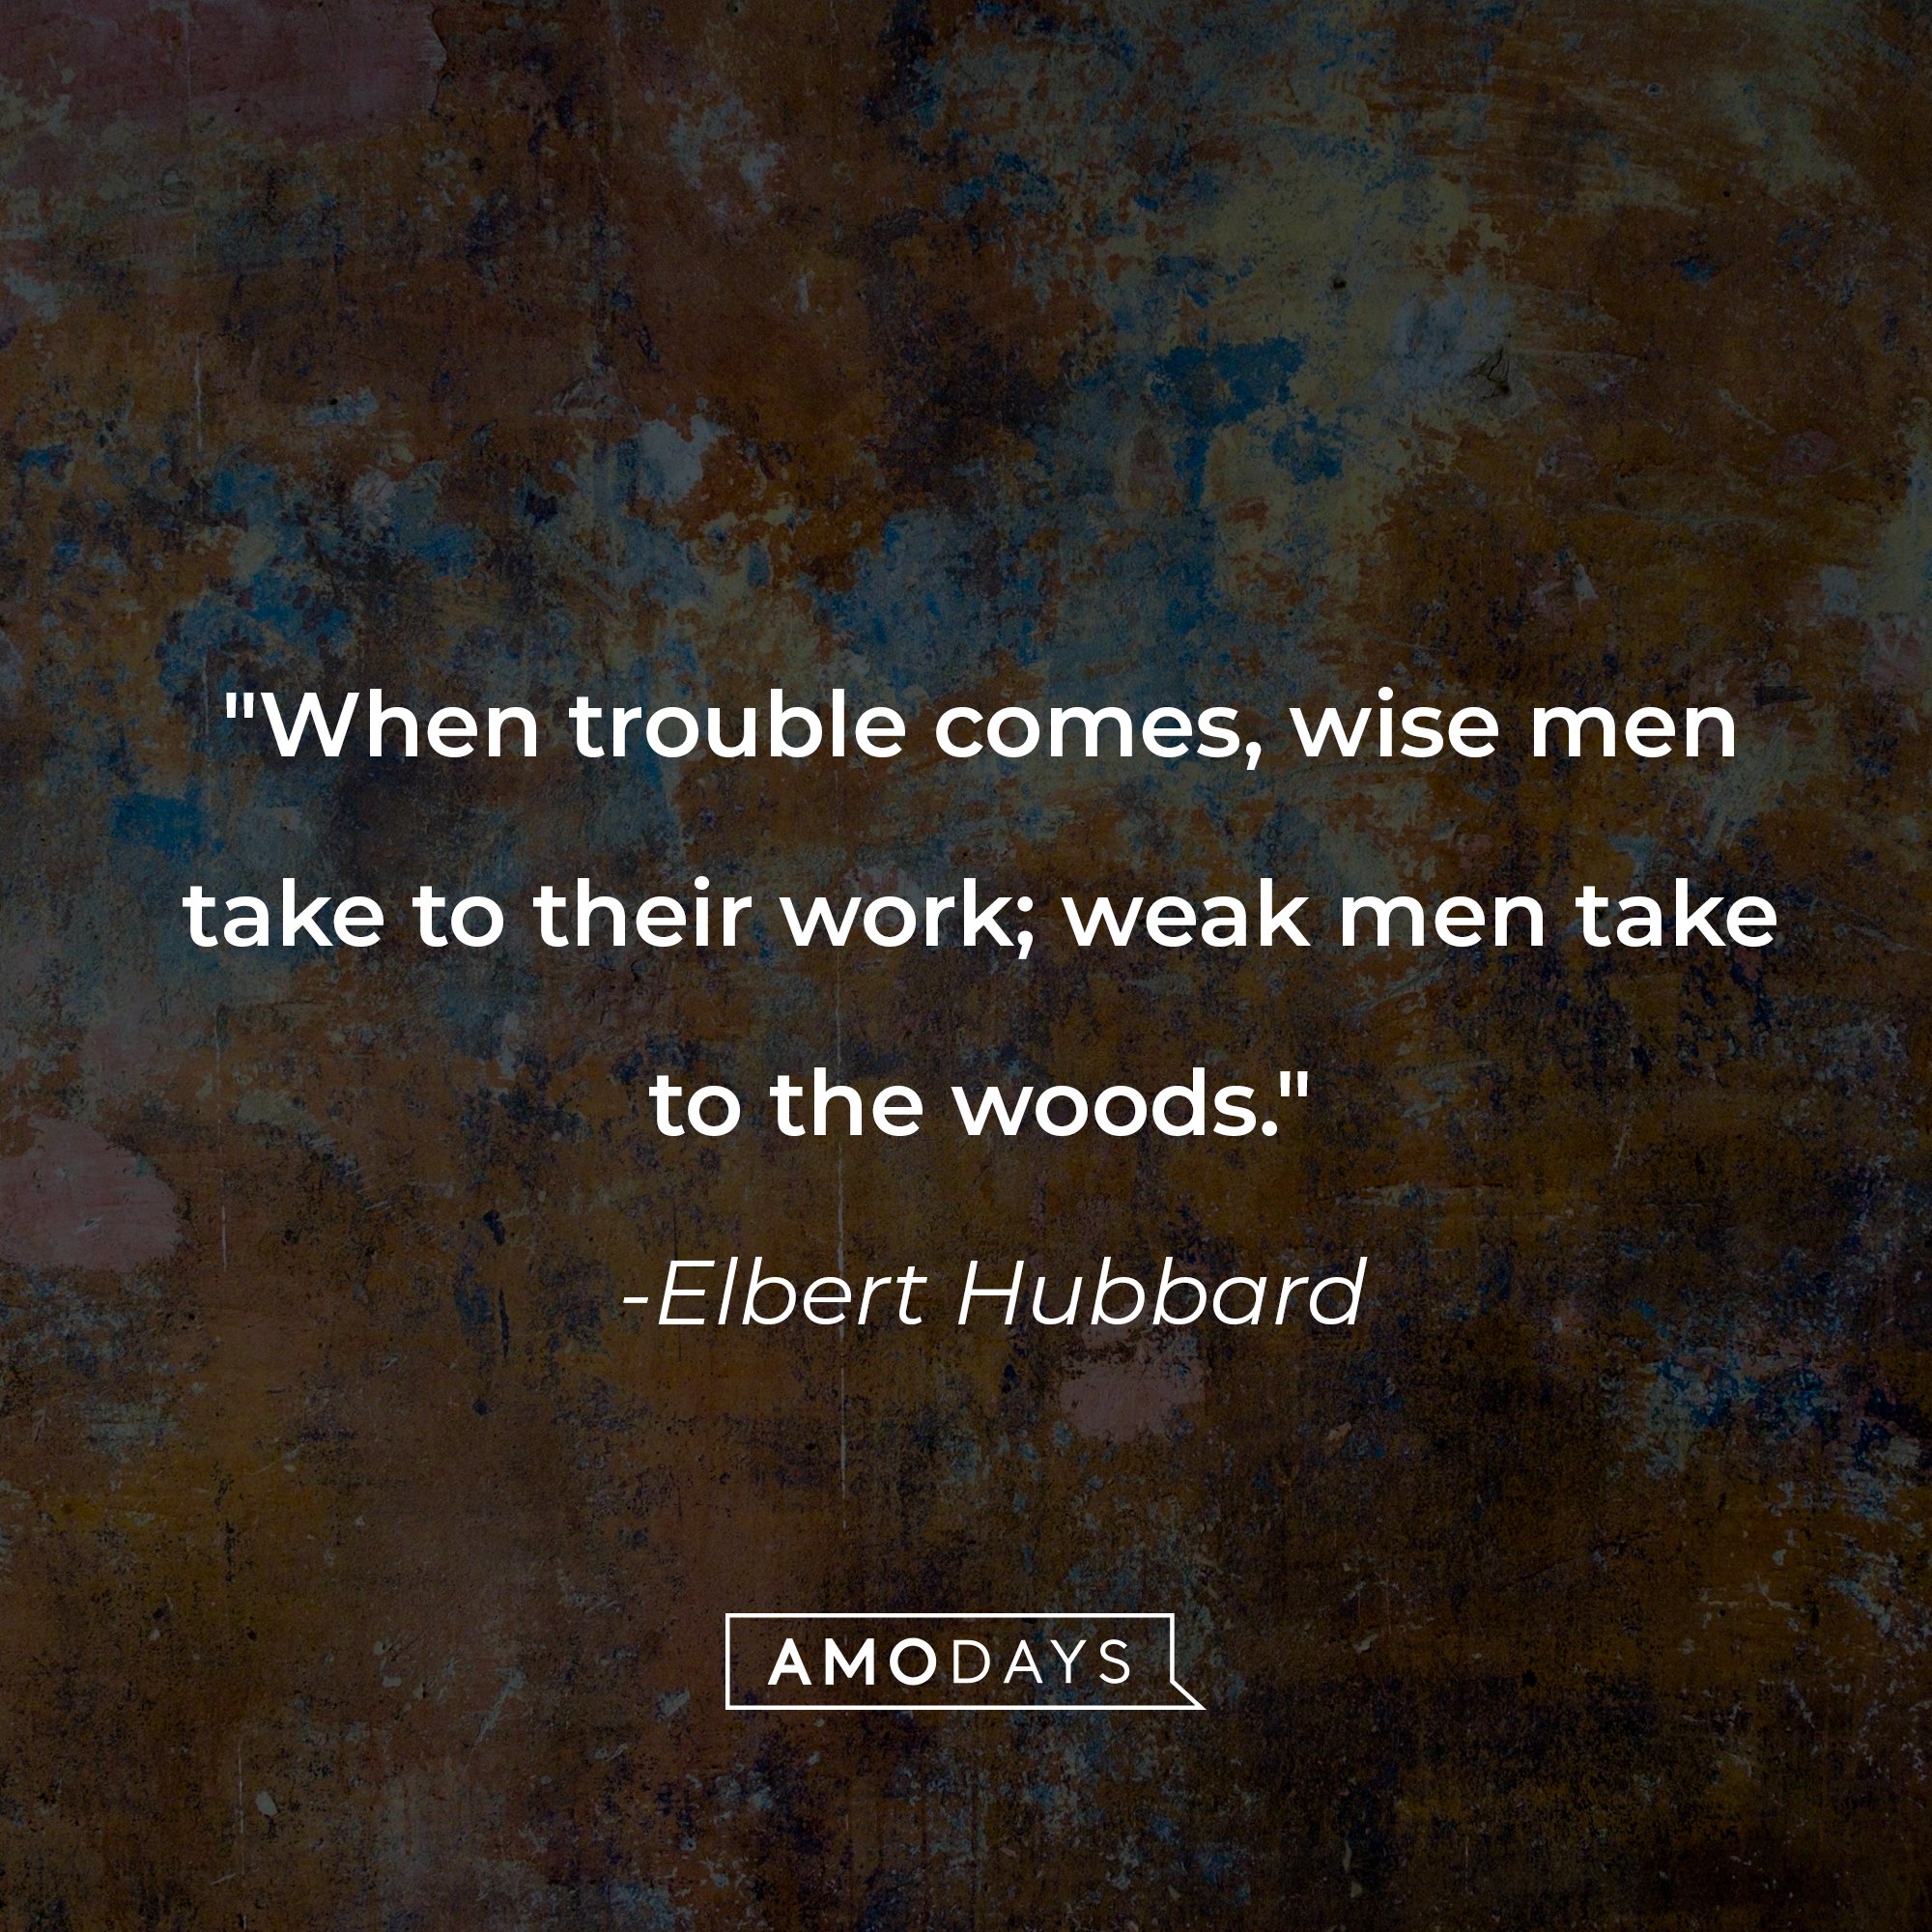 Elbert Hubbard's quote: "When trouble comes, wise men take to their work; weak men take to the woods." | Image: AmoDays